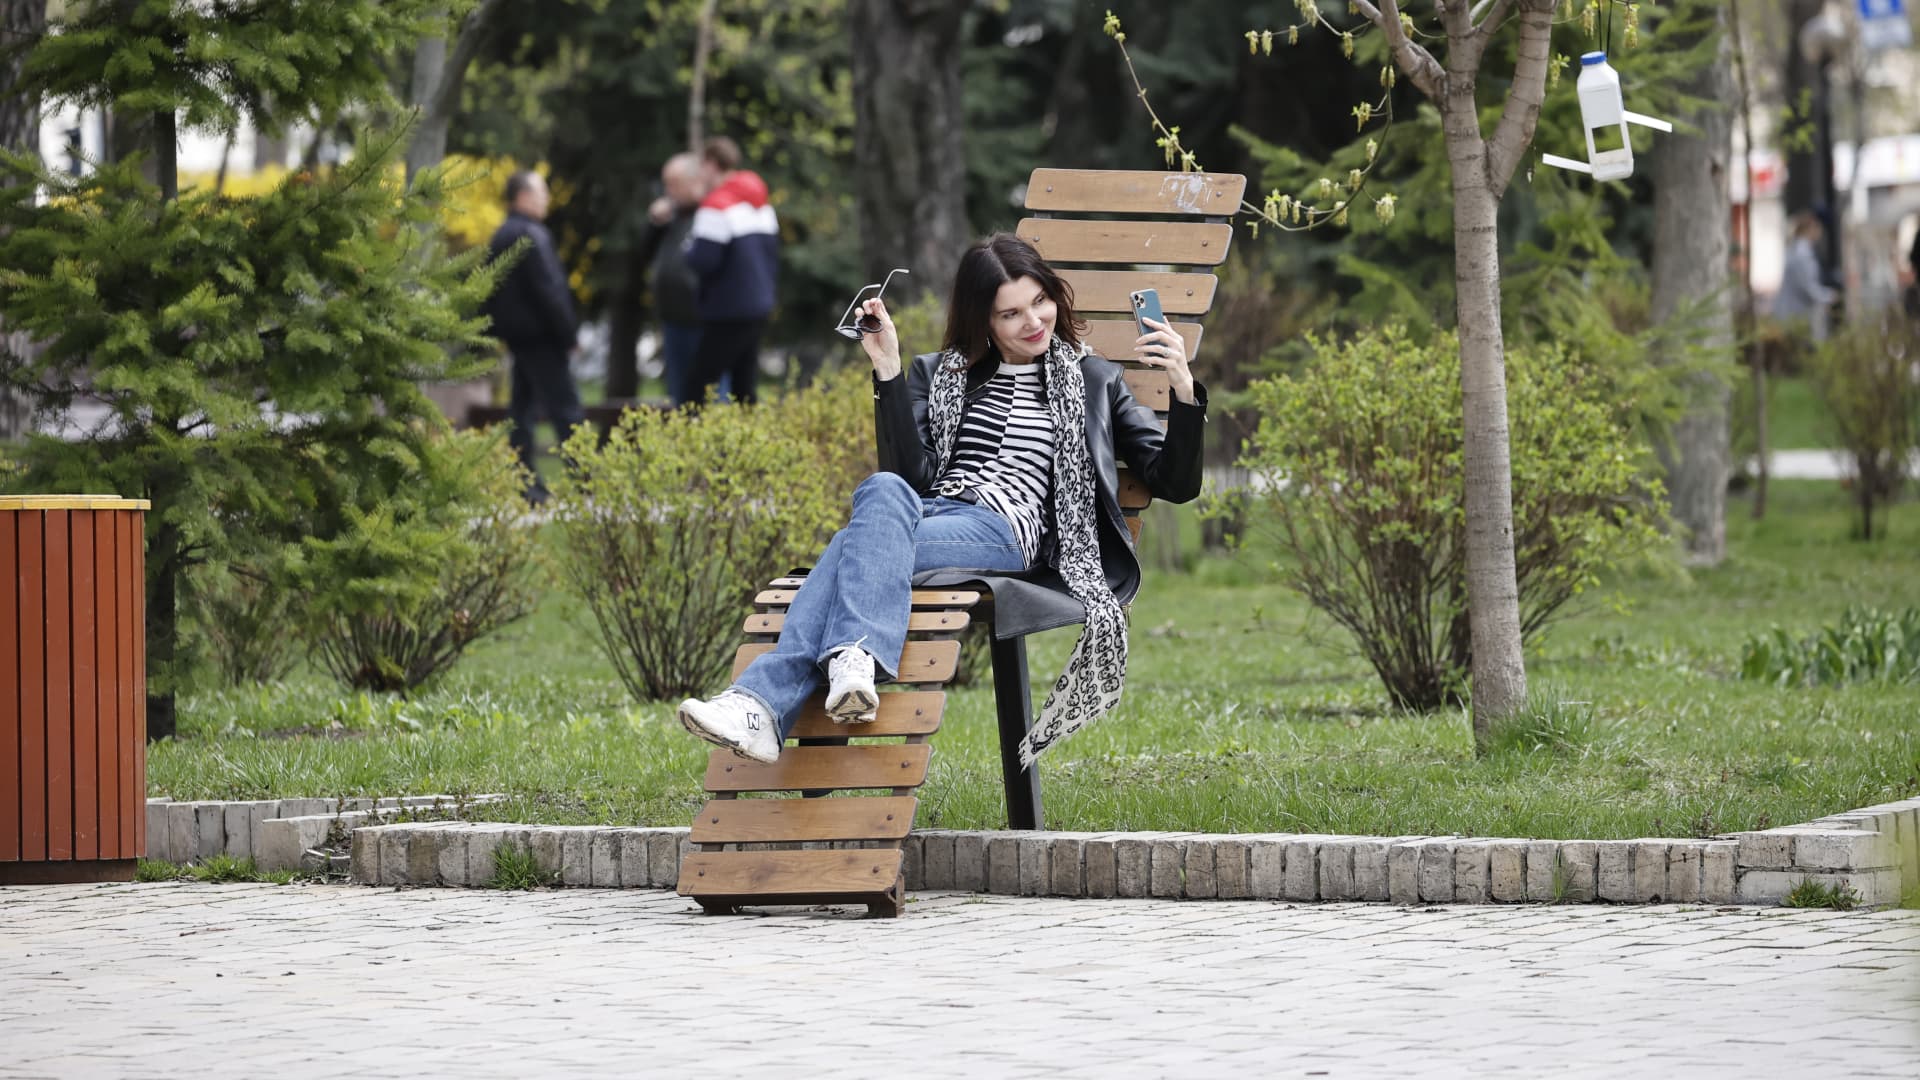 KYIV, UKRAINE - APRIL 25: Residents of the Ukrainian capital Kyiv can walk freely in the streets and at the city's park enjoying a beautiful spring day after weeks of Russian attacks on April 25, 2022.. (Photo by Dogukan Keskinkilic/Anadolu Agency via Getty Images)